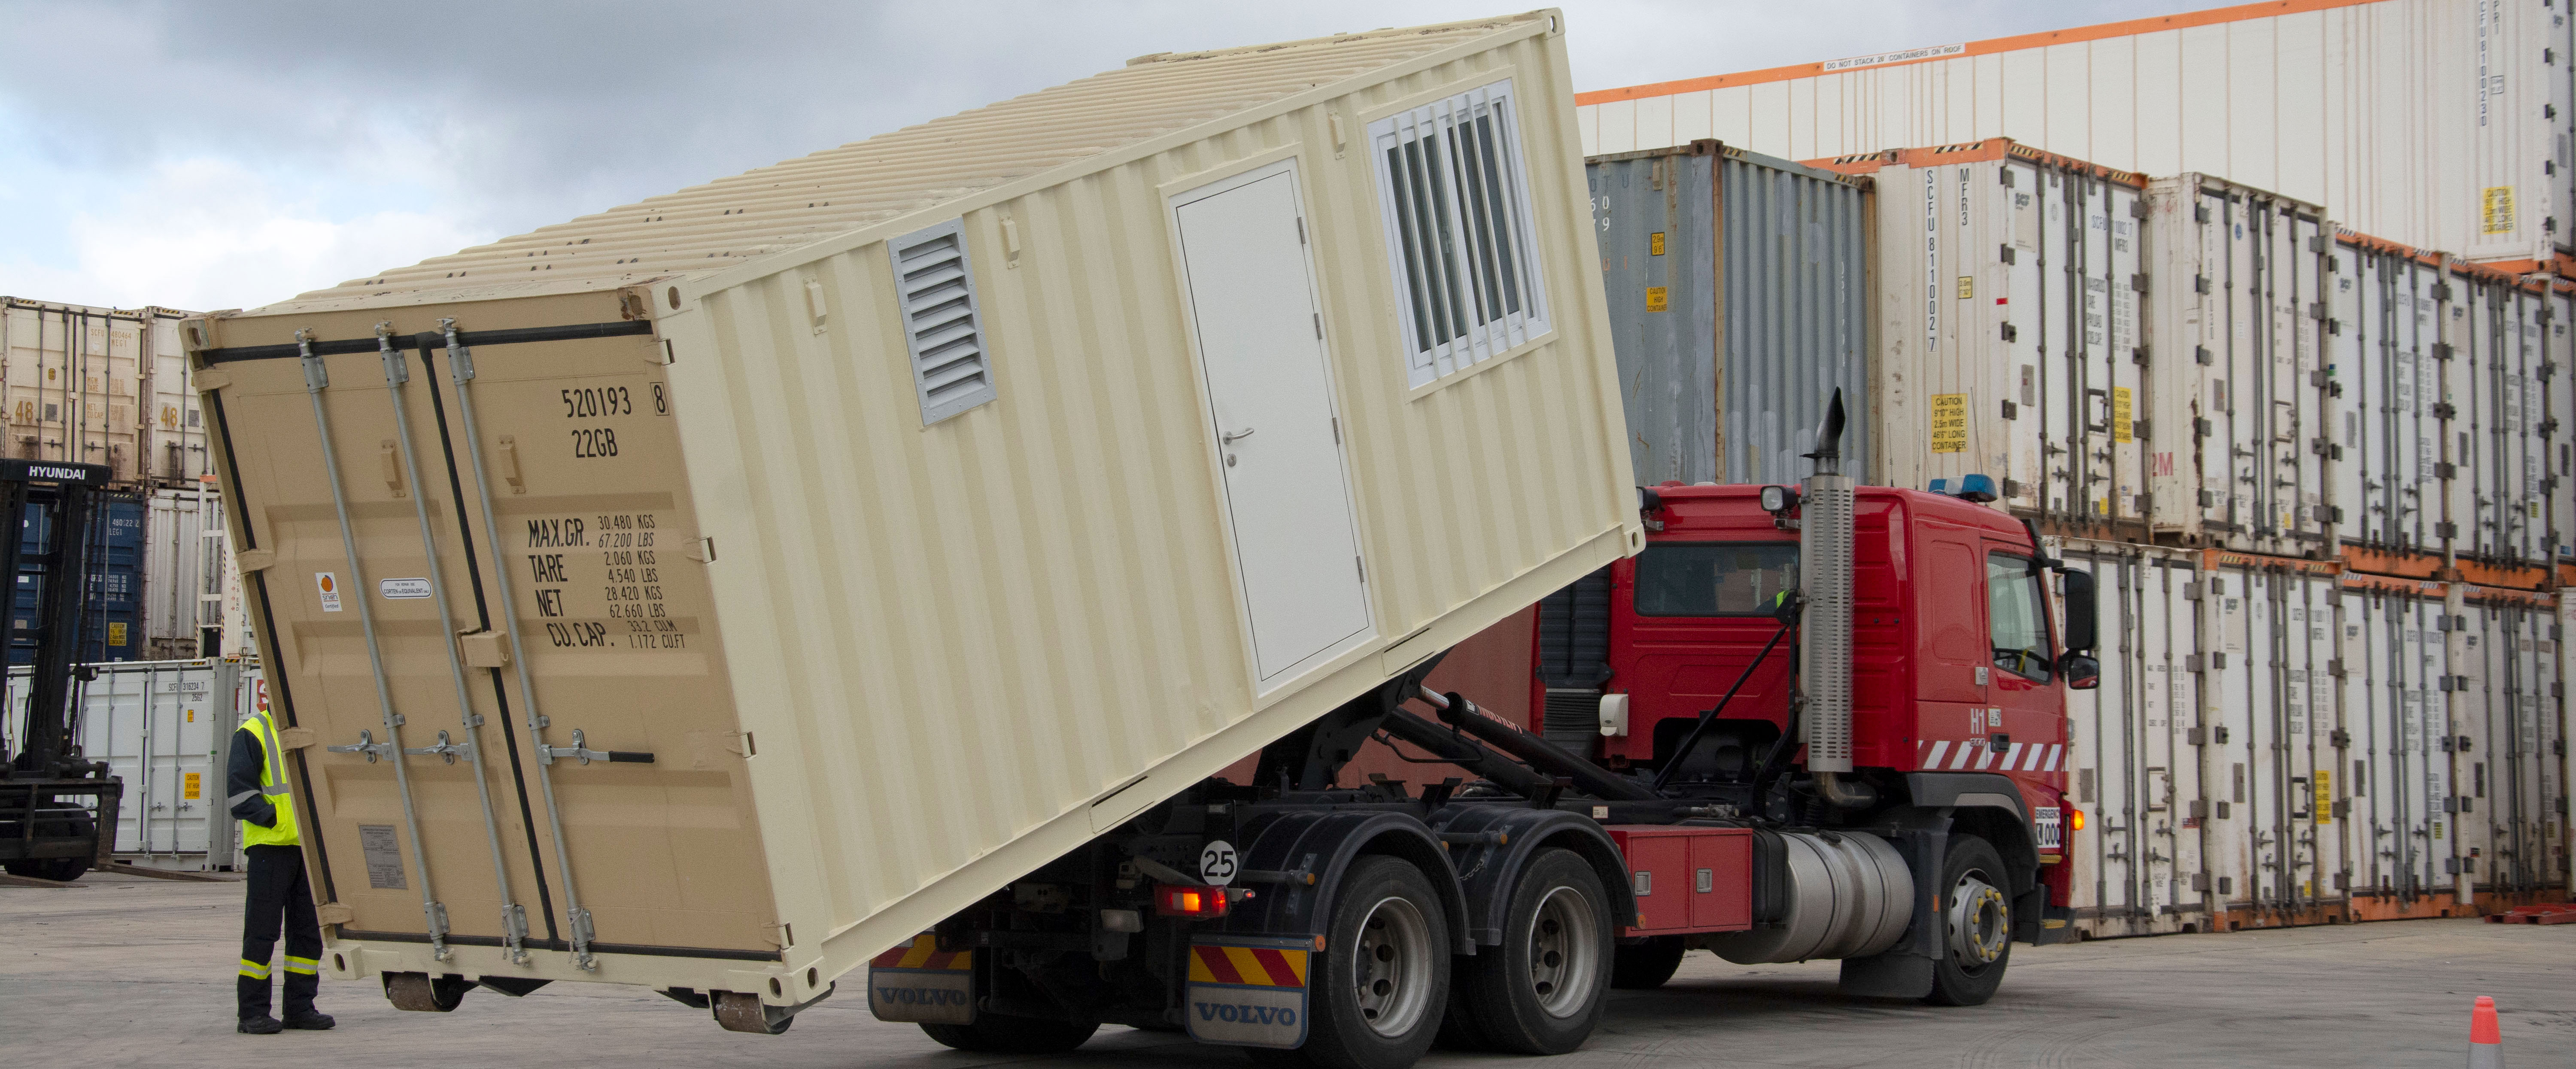 A mobile shed being loaded onto a truck